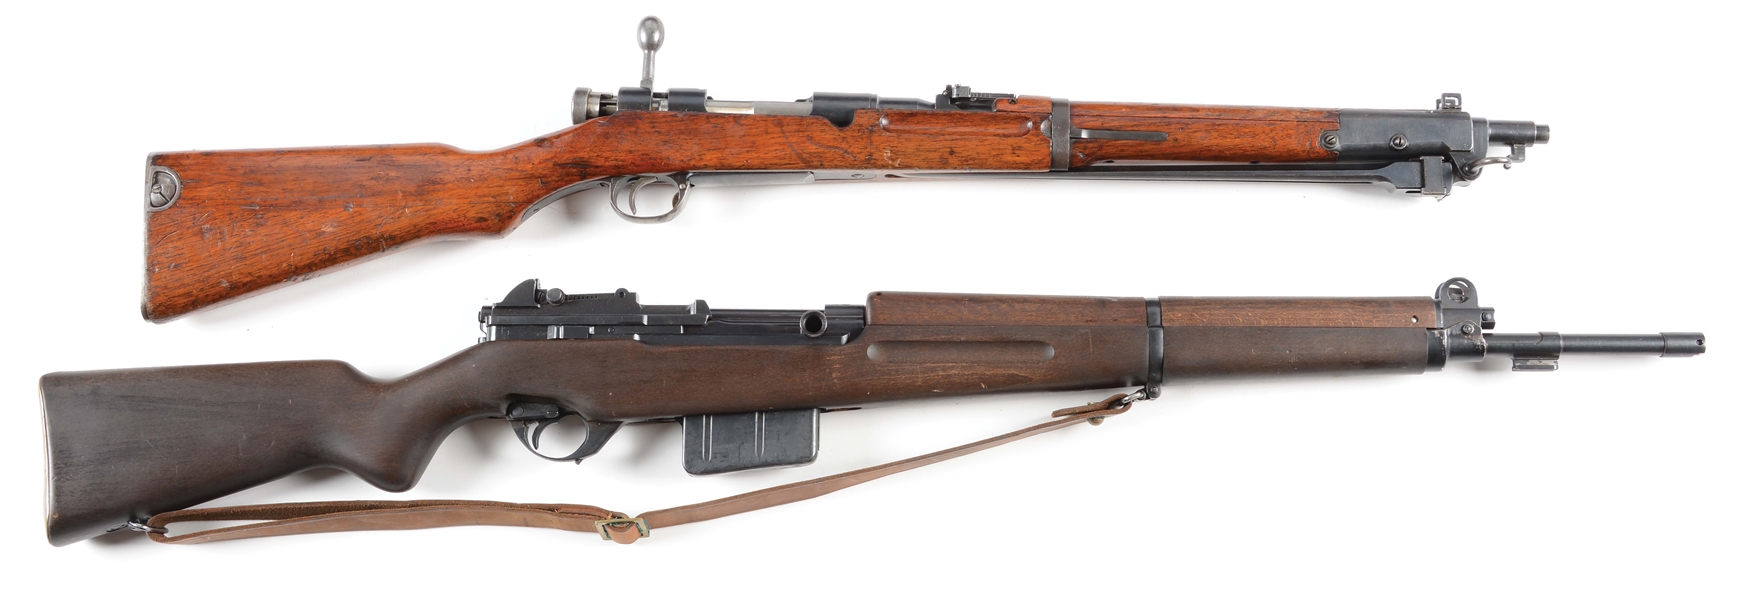 (C) LOT OF 2: EGYPTIAN FN MODEL 1949 SEMI -AUTOMATIC RIFLE  AND NAGOYA ARSENAL TYPE 44 BOLT ACTION CARBINE.